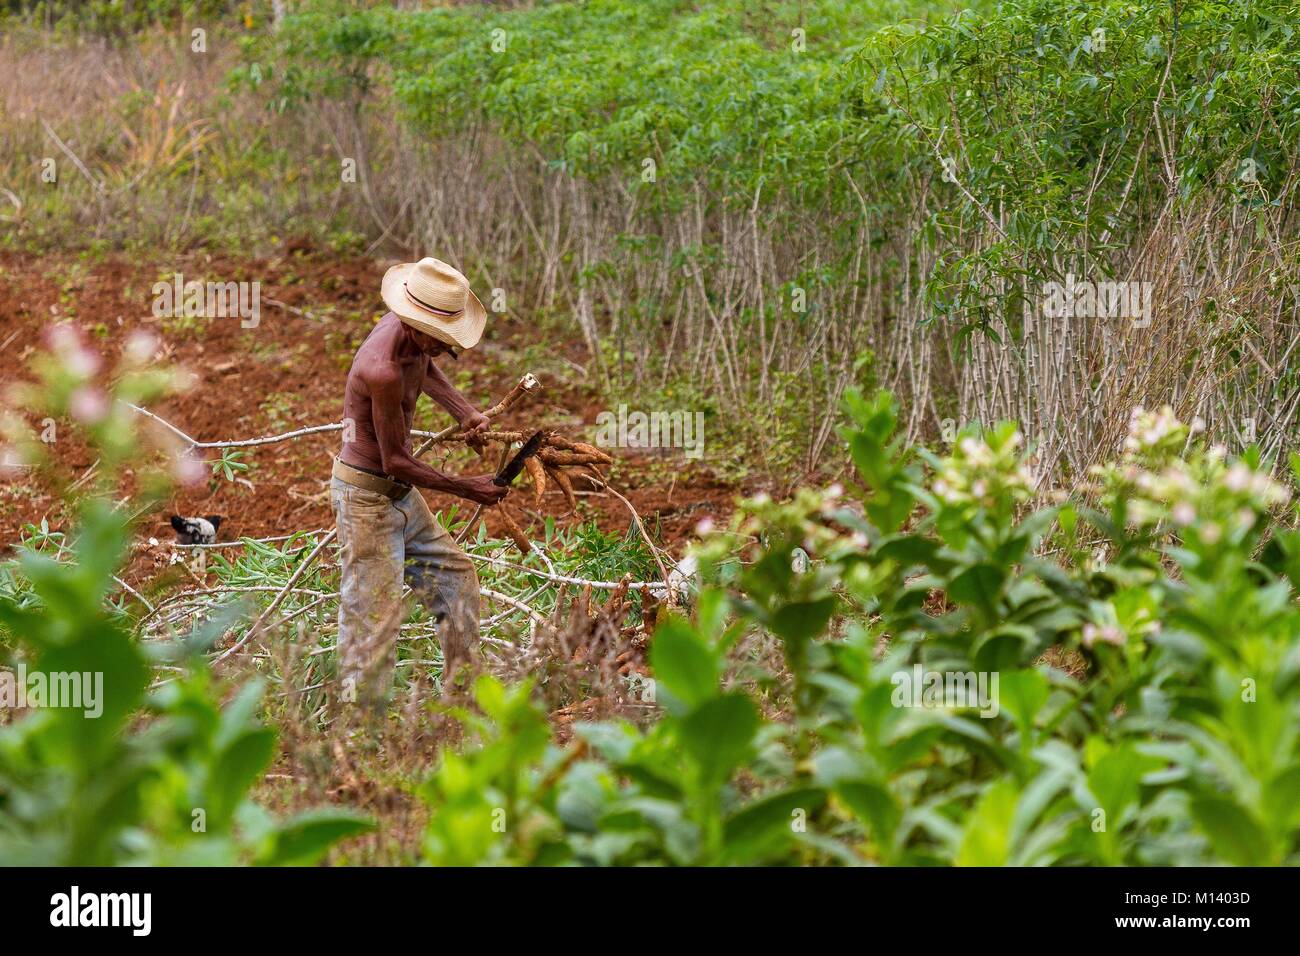 Cuba, Pinar del Rio province, Vinales, Vinales National Park, Vinales Valley UNESCO World Heritage, man working in the fields Stock Photo